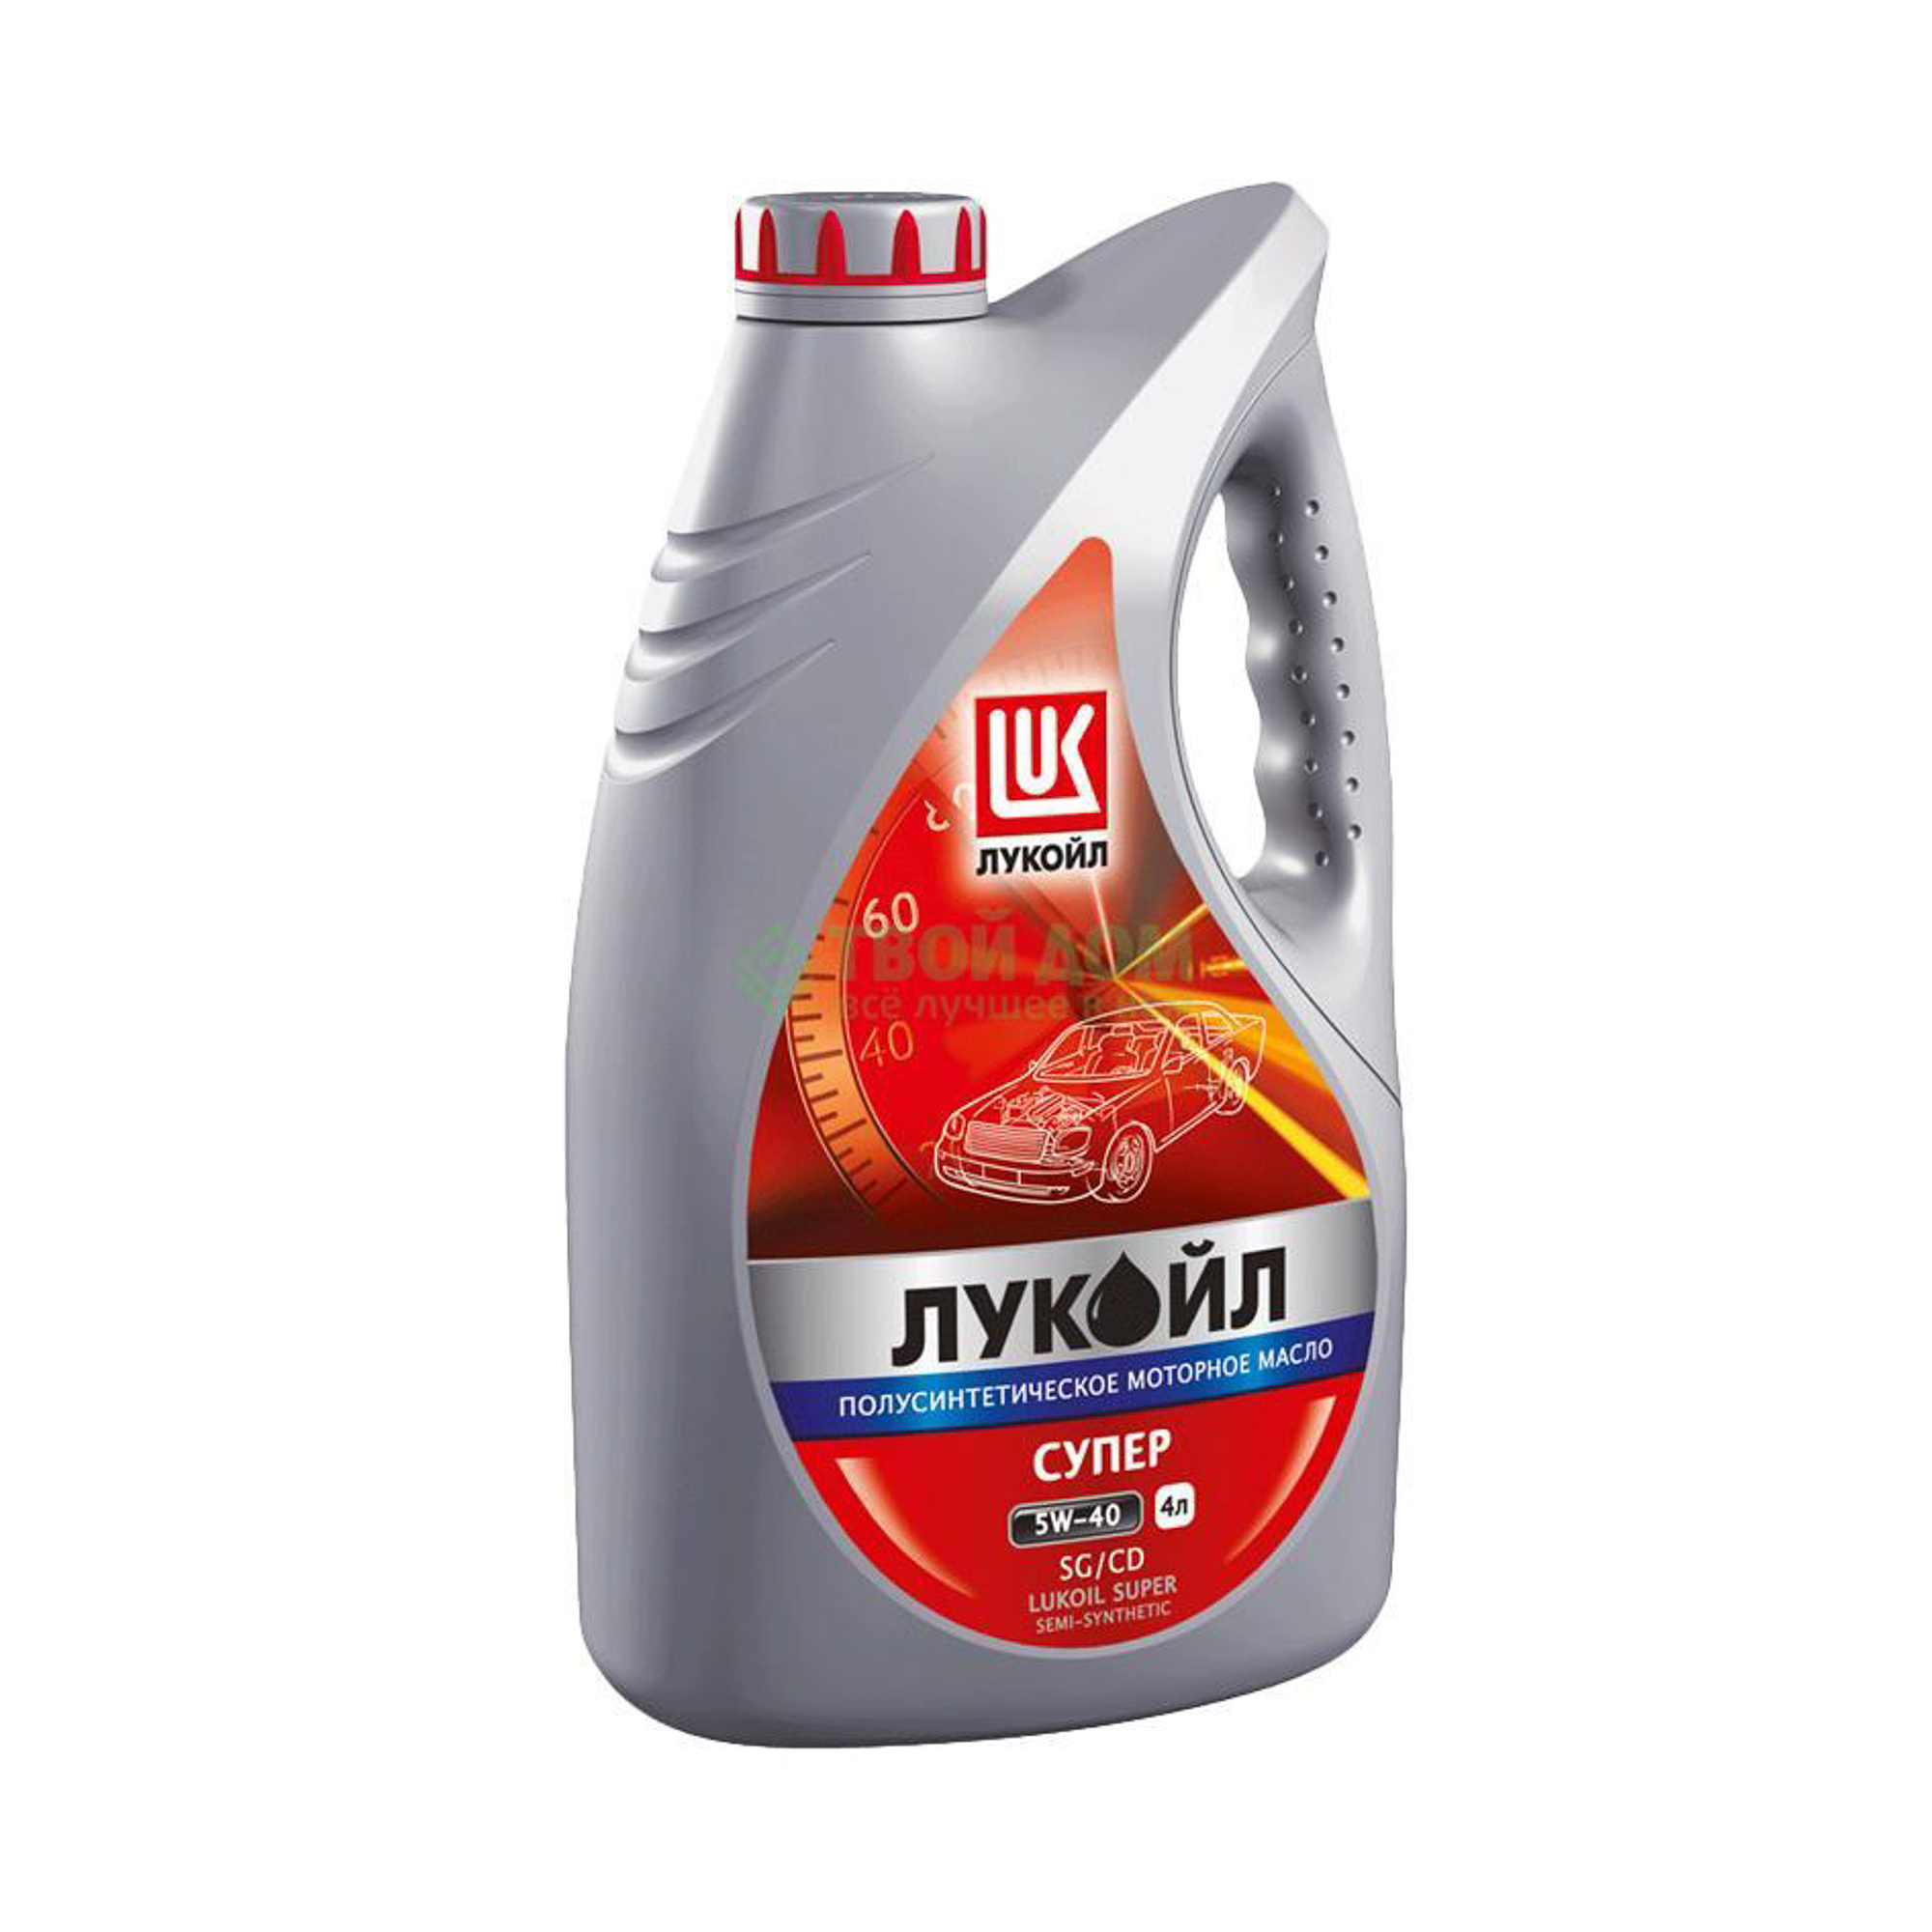 Масло лукойл зик. Lukoil super 5w-40. Лукойл супер 5w40. Лукойл мото 2т (4 л) 19557. Лукойл супер 5w40 полусинтетика.